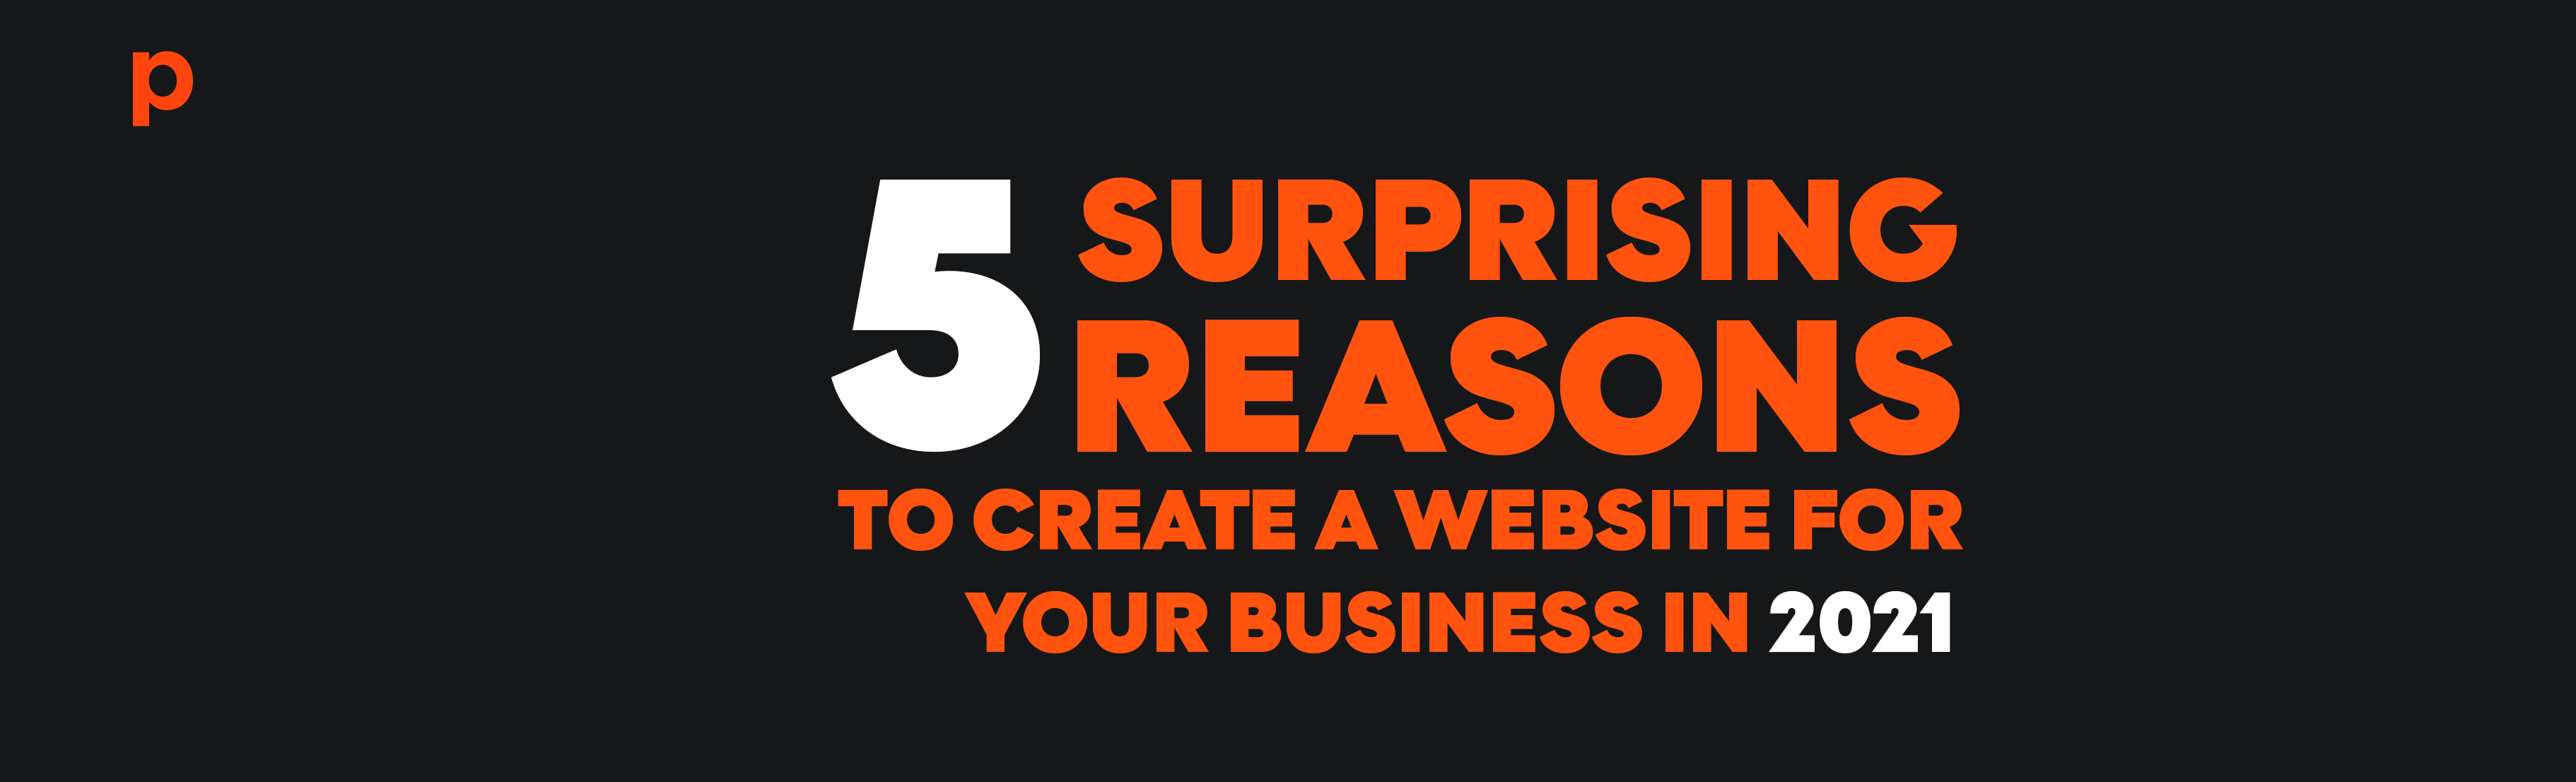 5 Surprising Reasons to Create a Website for Your Business in 2021